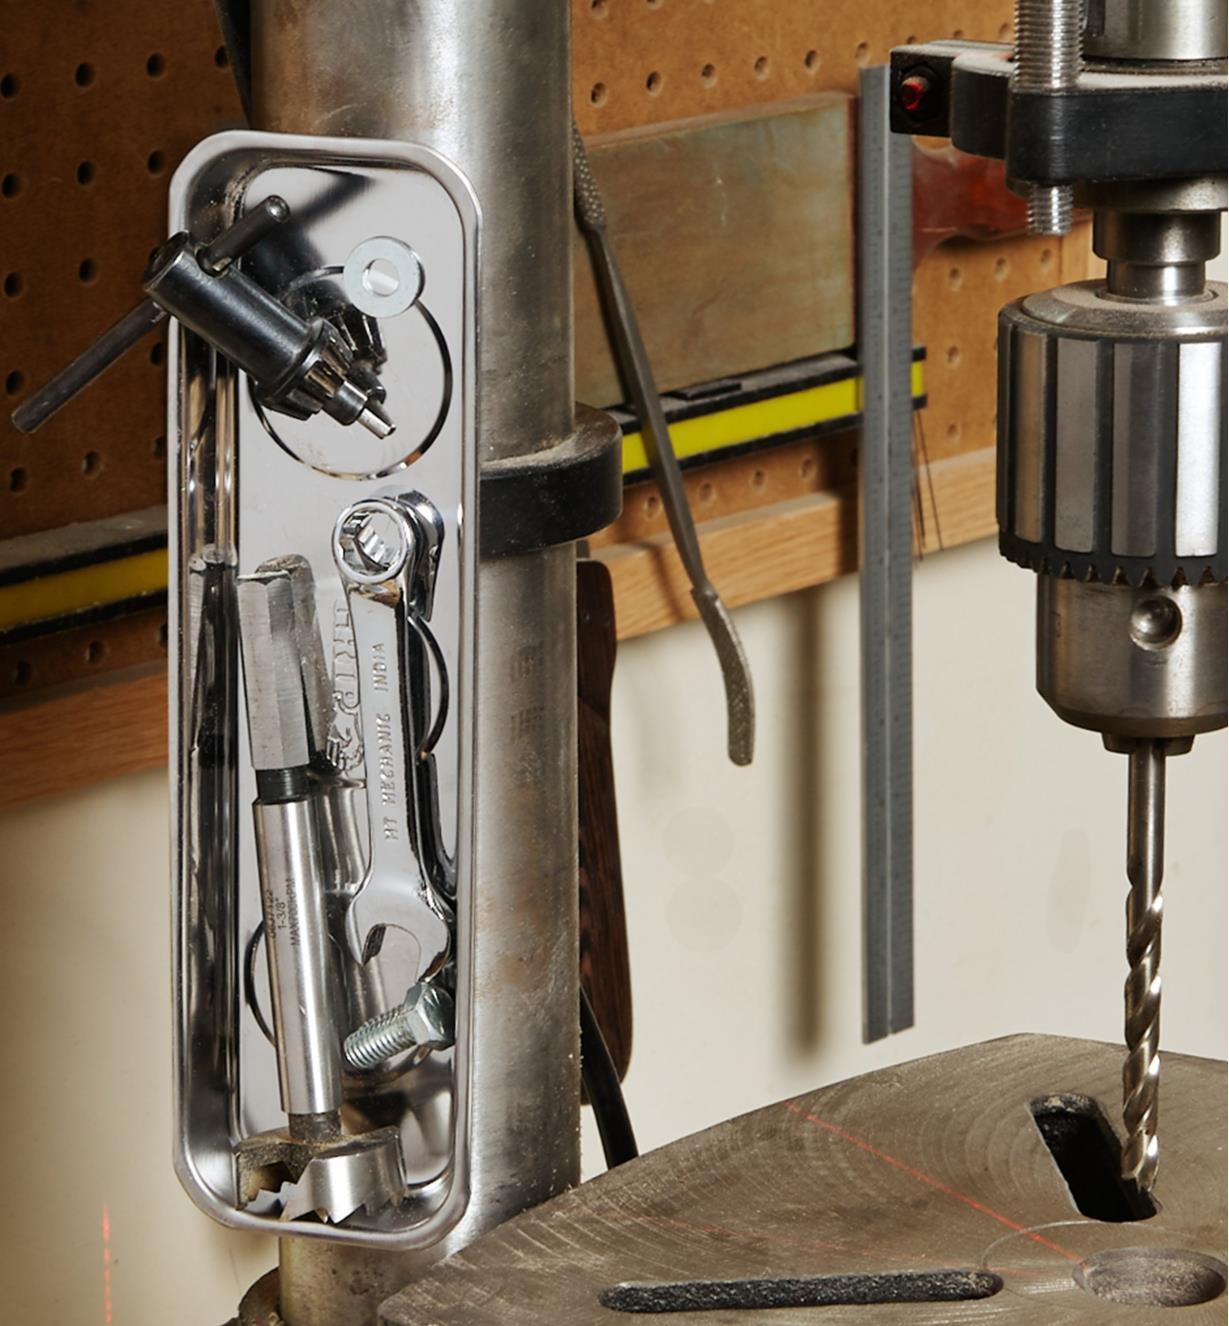 A magnetic parts tray filled with small items is held vertically against a metal column